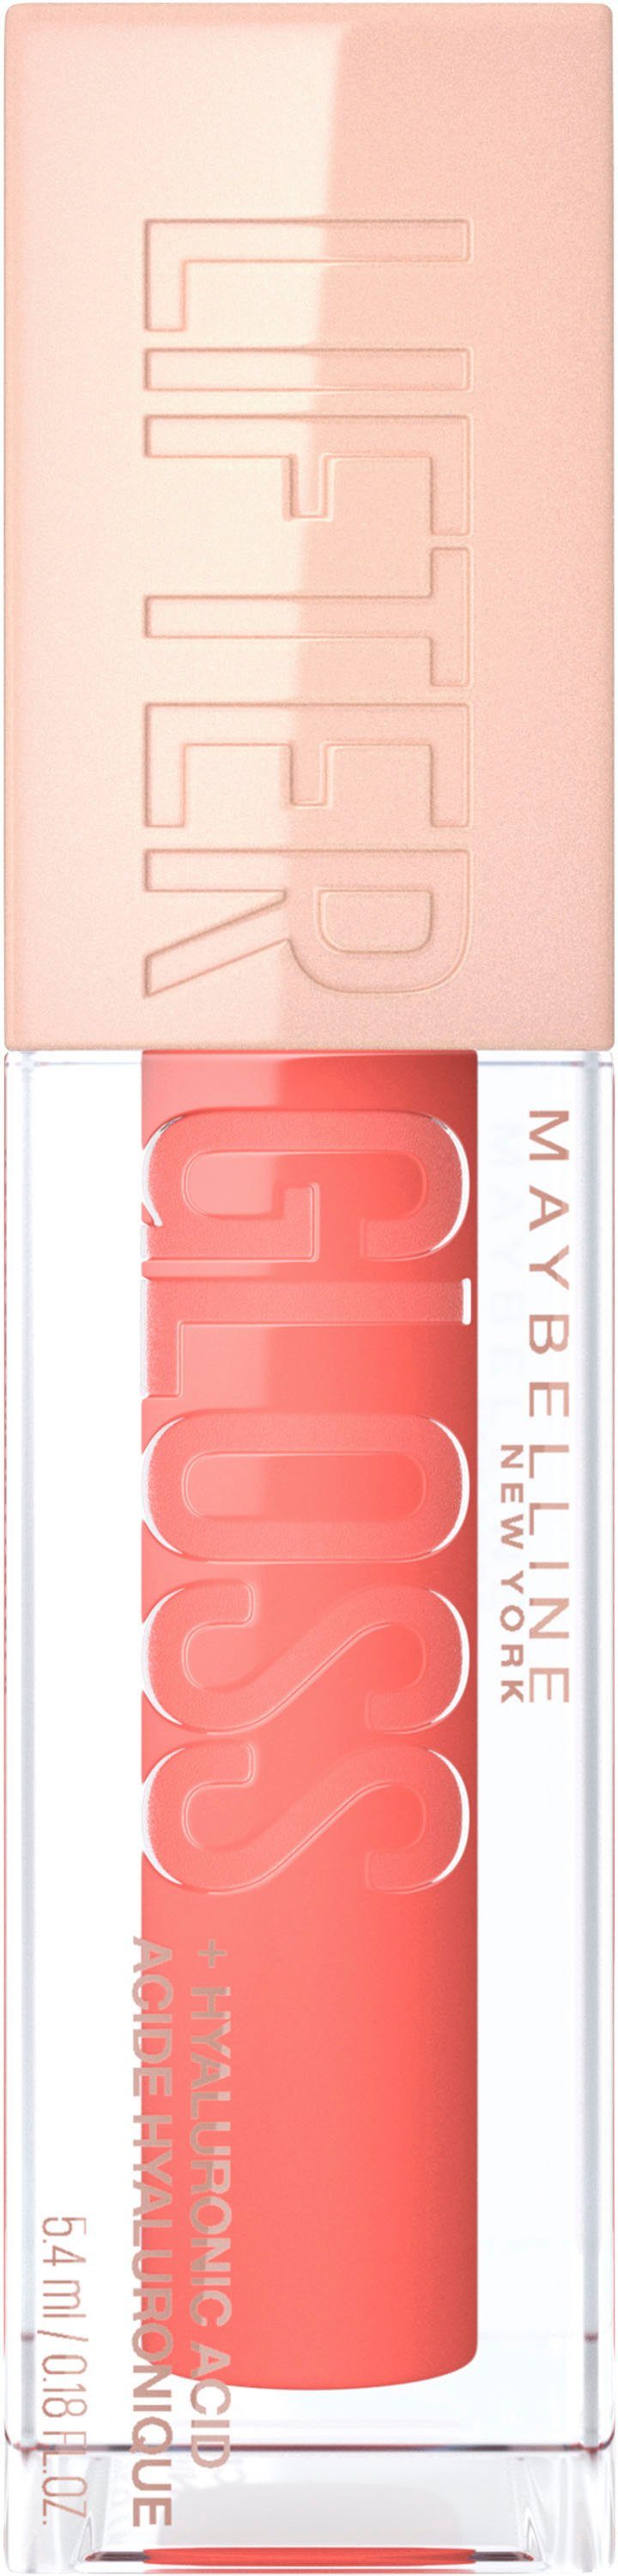 NEW New Lifter YORK MAYBELLINE Lipgloss Gloss Maybelline York